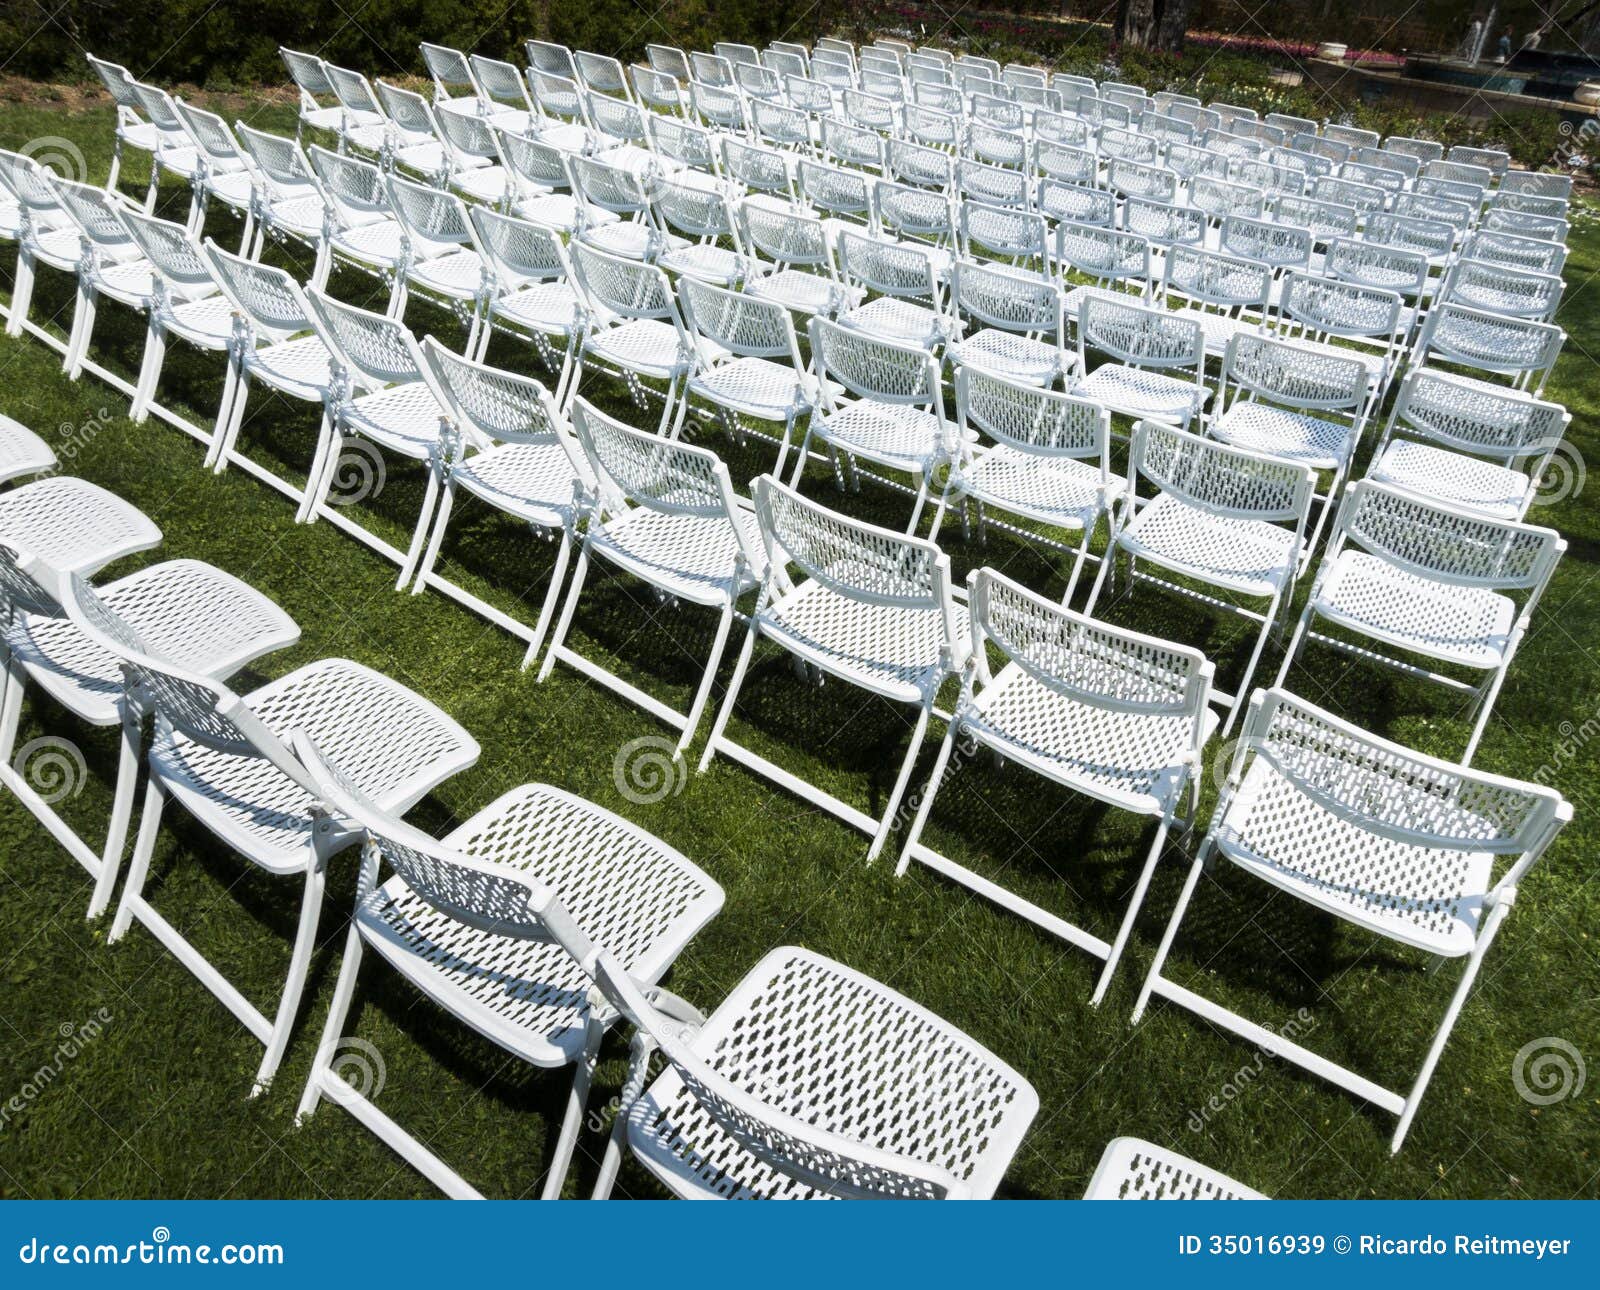 Symmetrical Pattern Of White Folding Chairs At Outdoor Garden